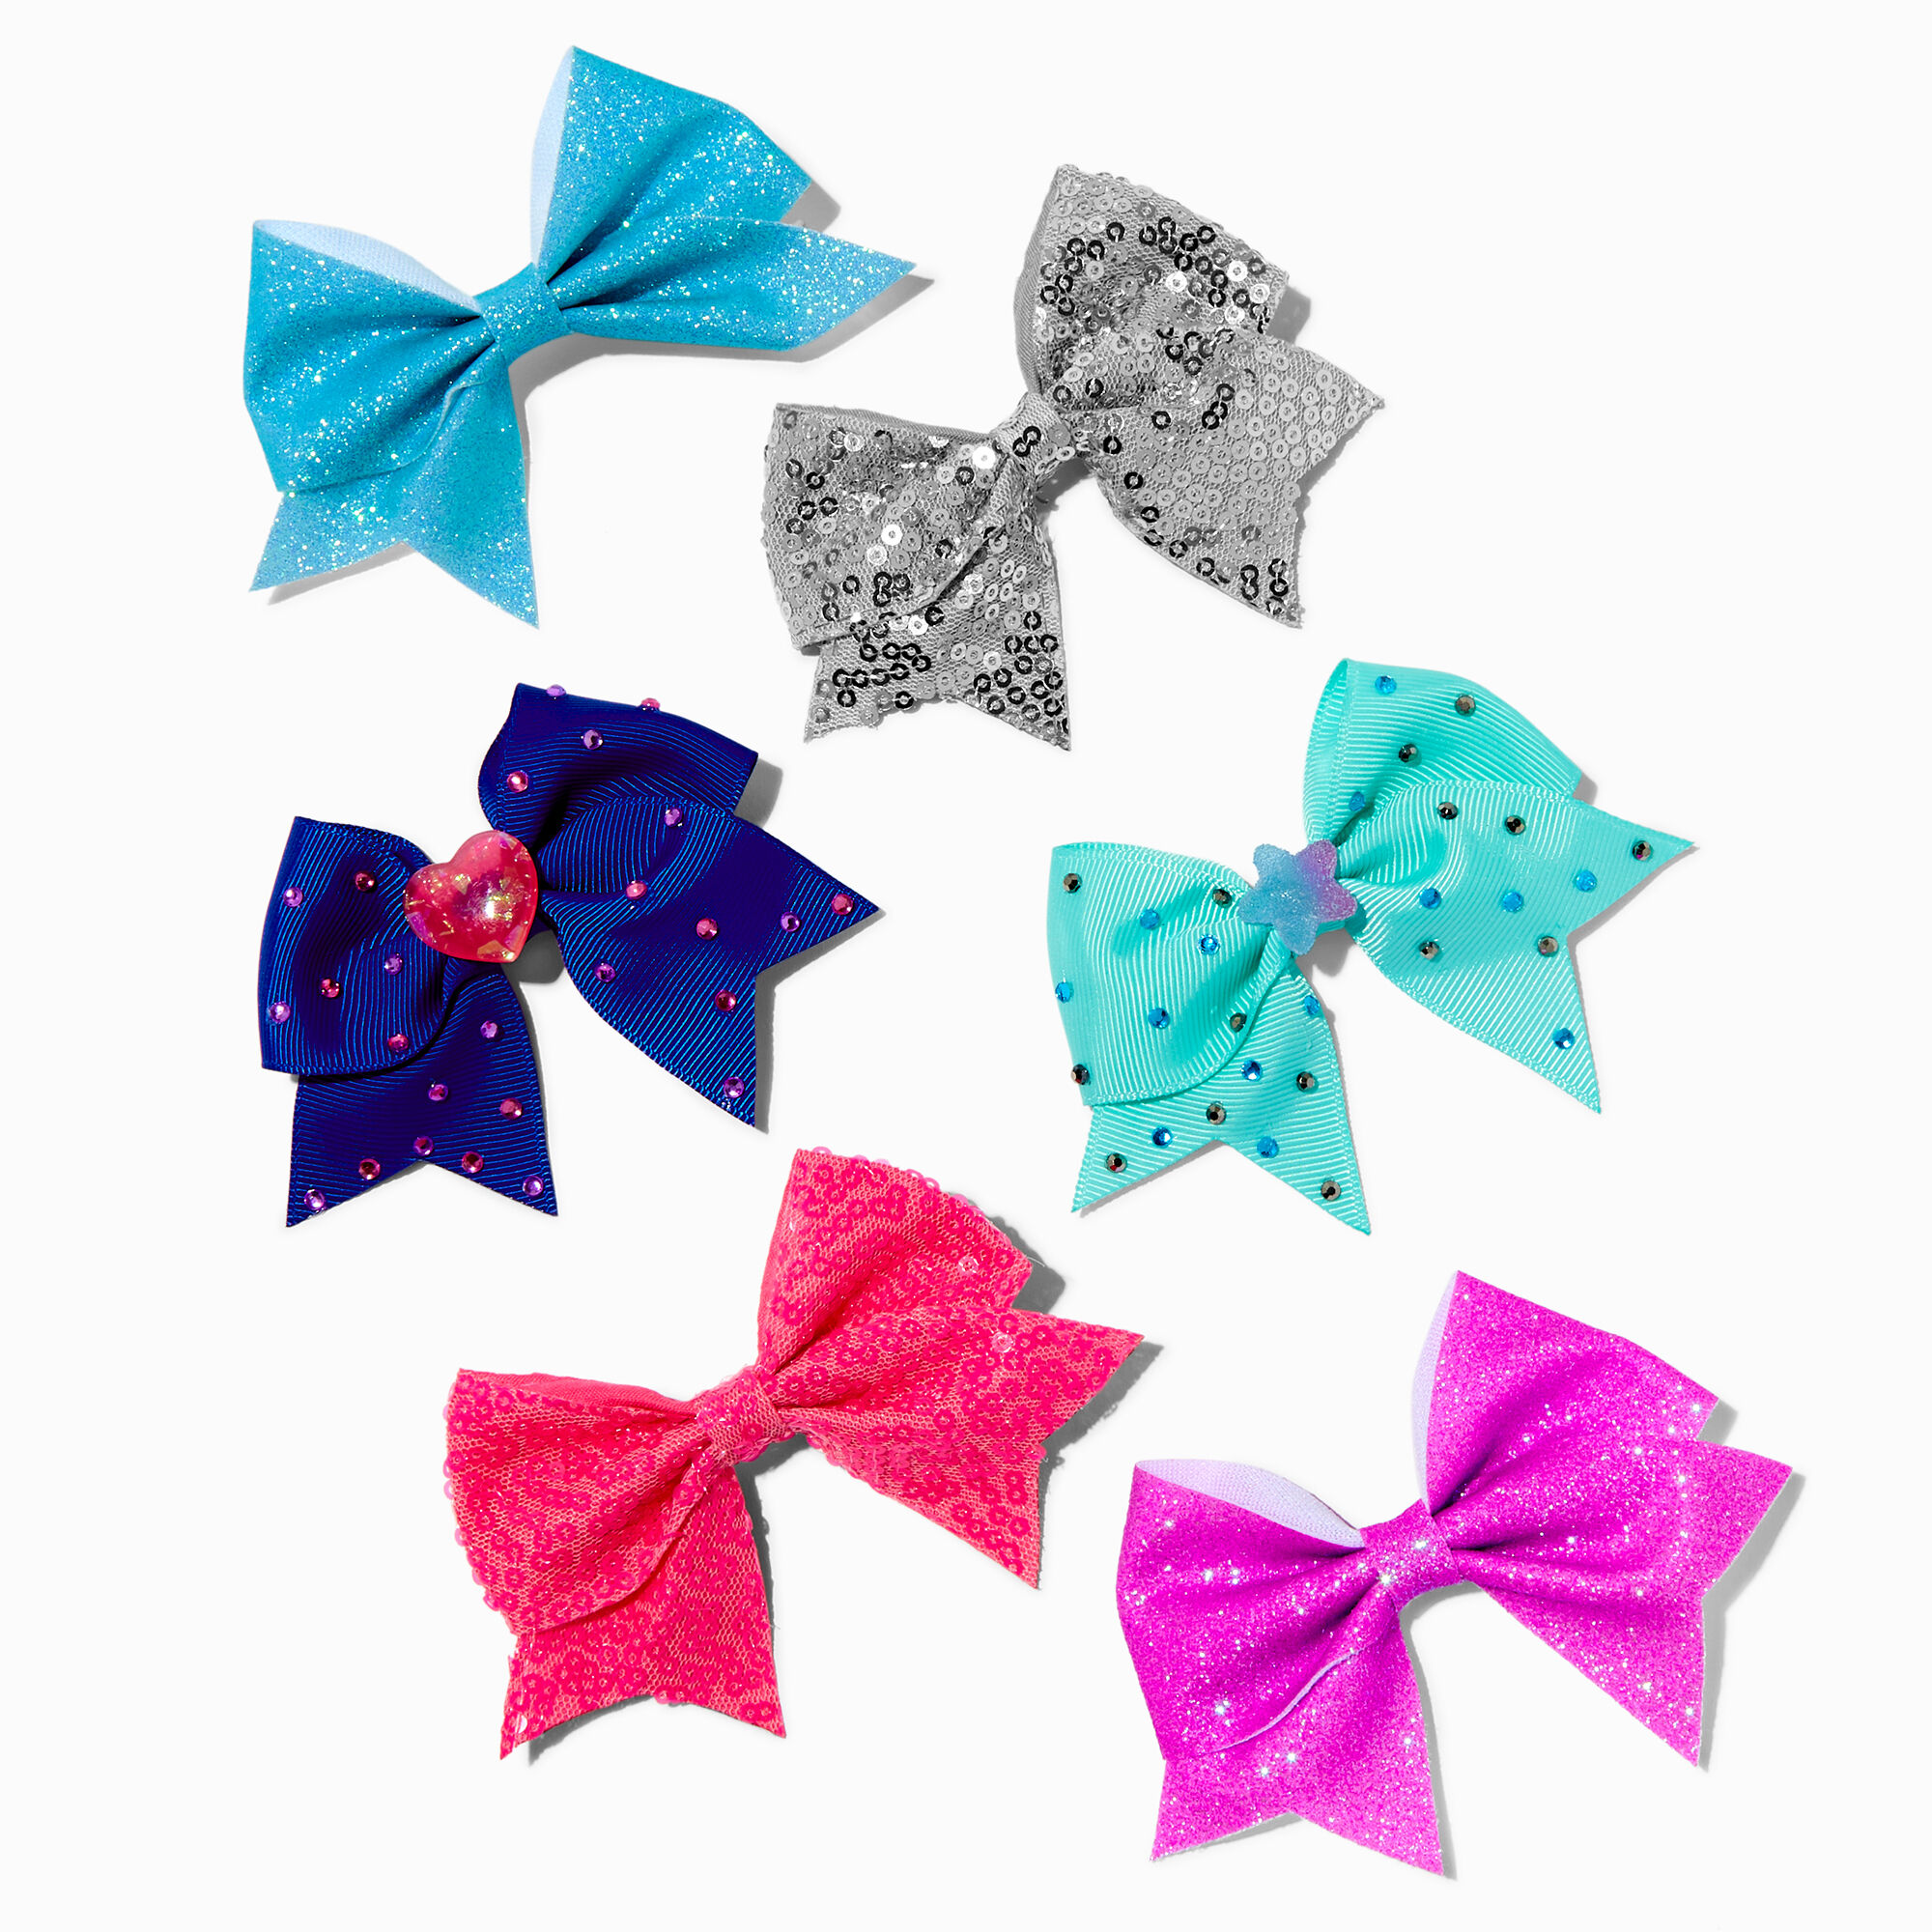 View Claires Club Quirky Jewel Tone Hair Bow Clips 6 Pack information